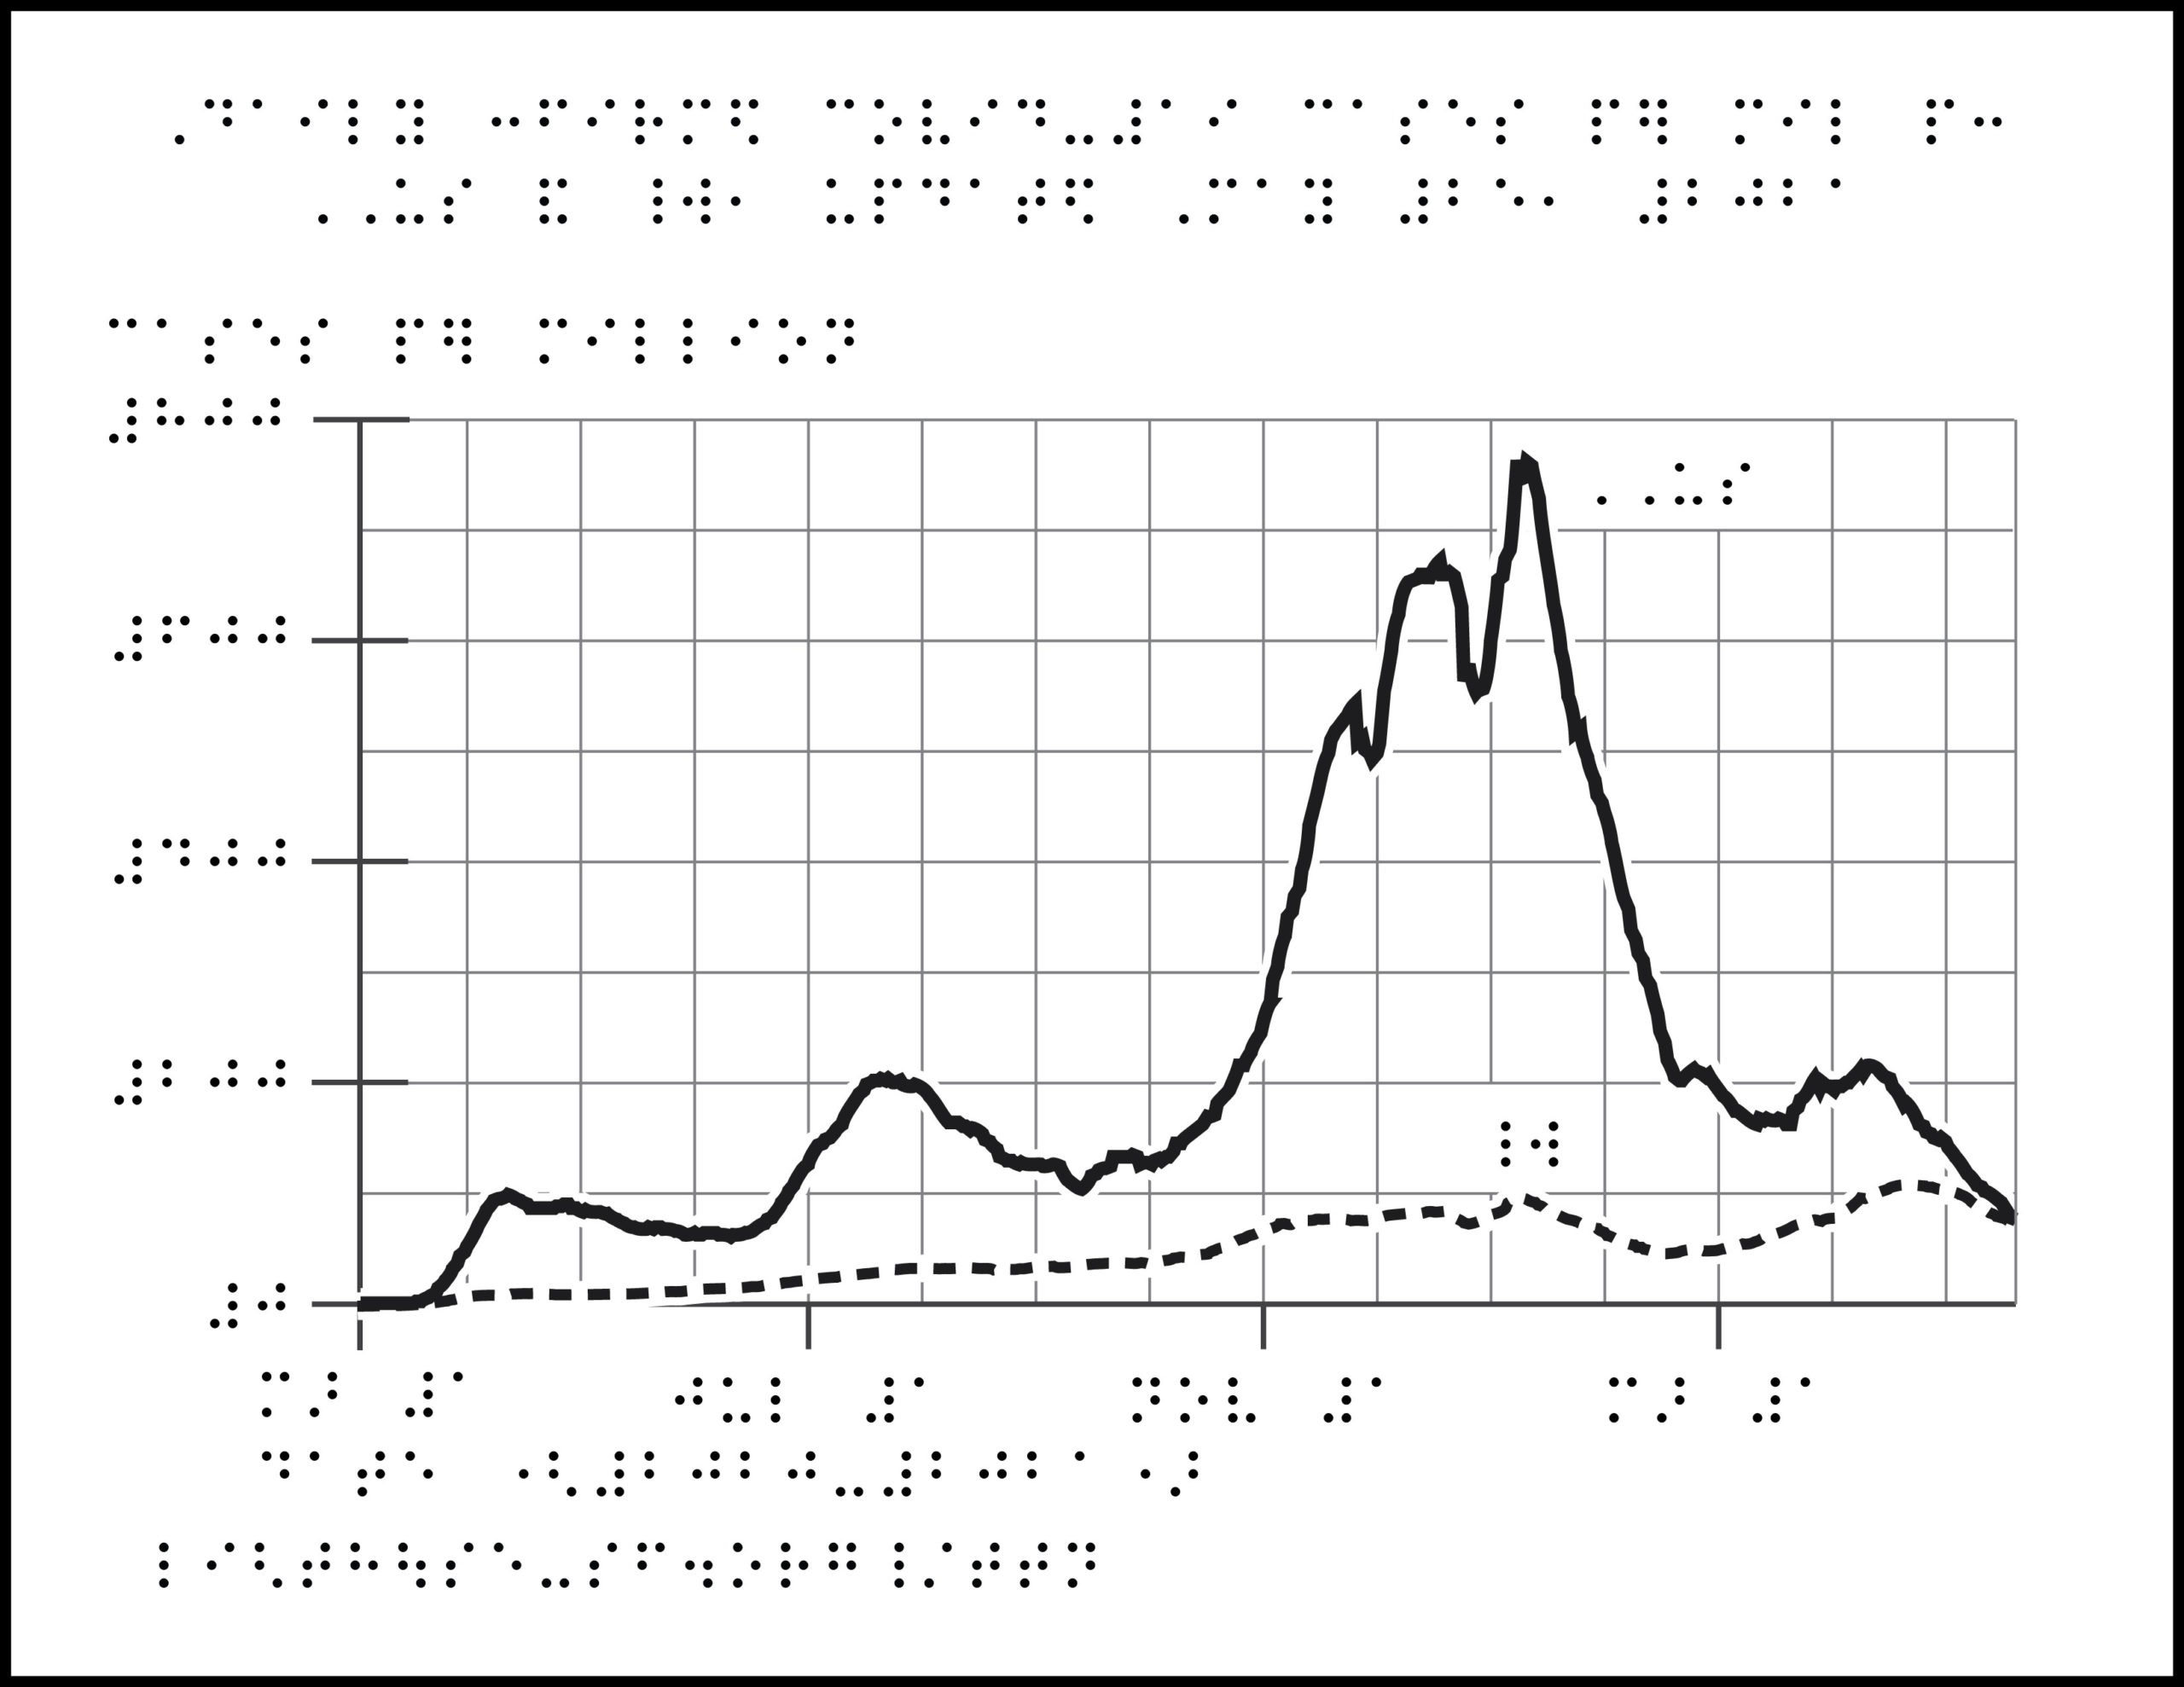 graph with braille labels, two lines increasing and decreasing from origin along x- and y-axes